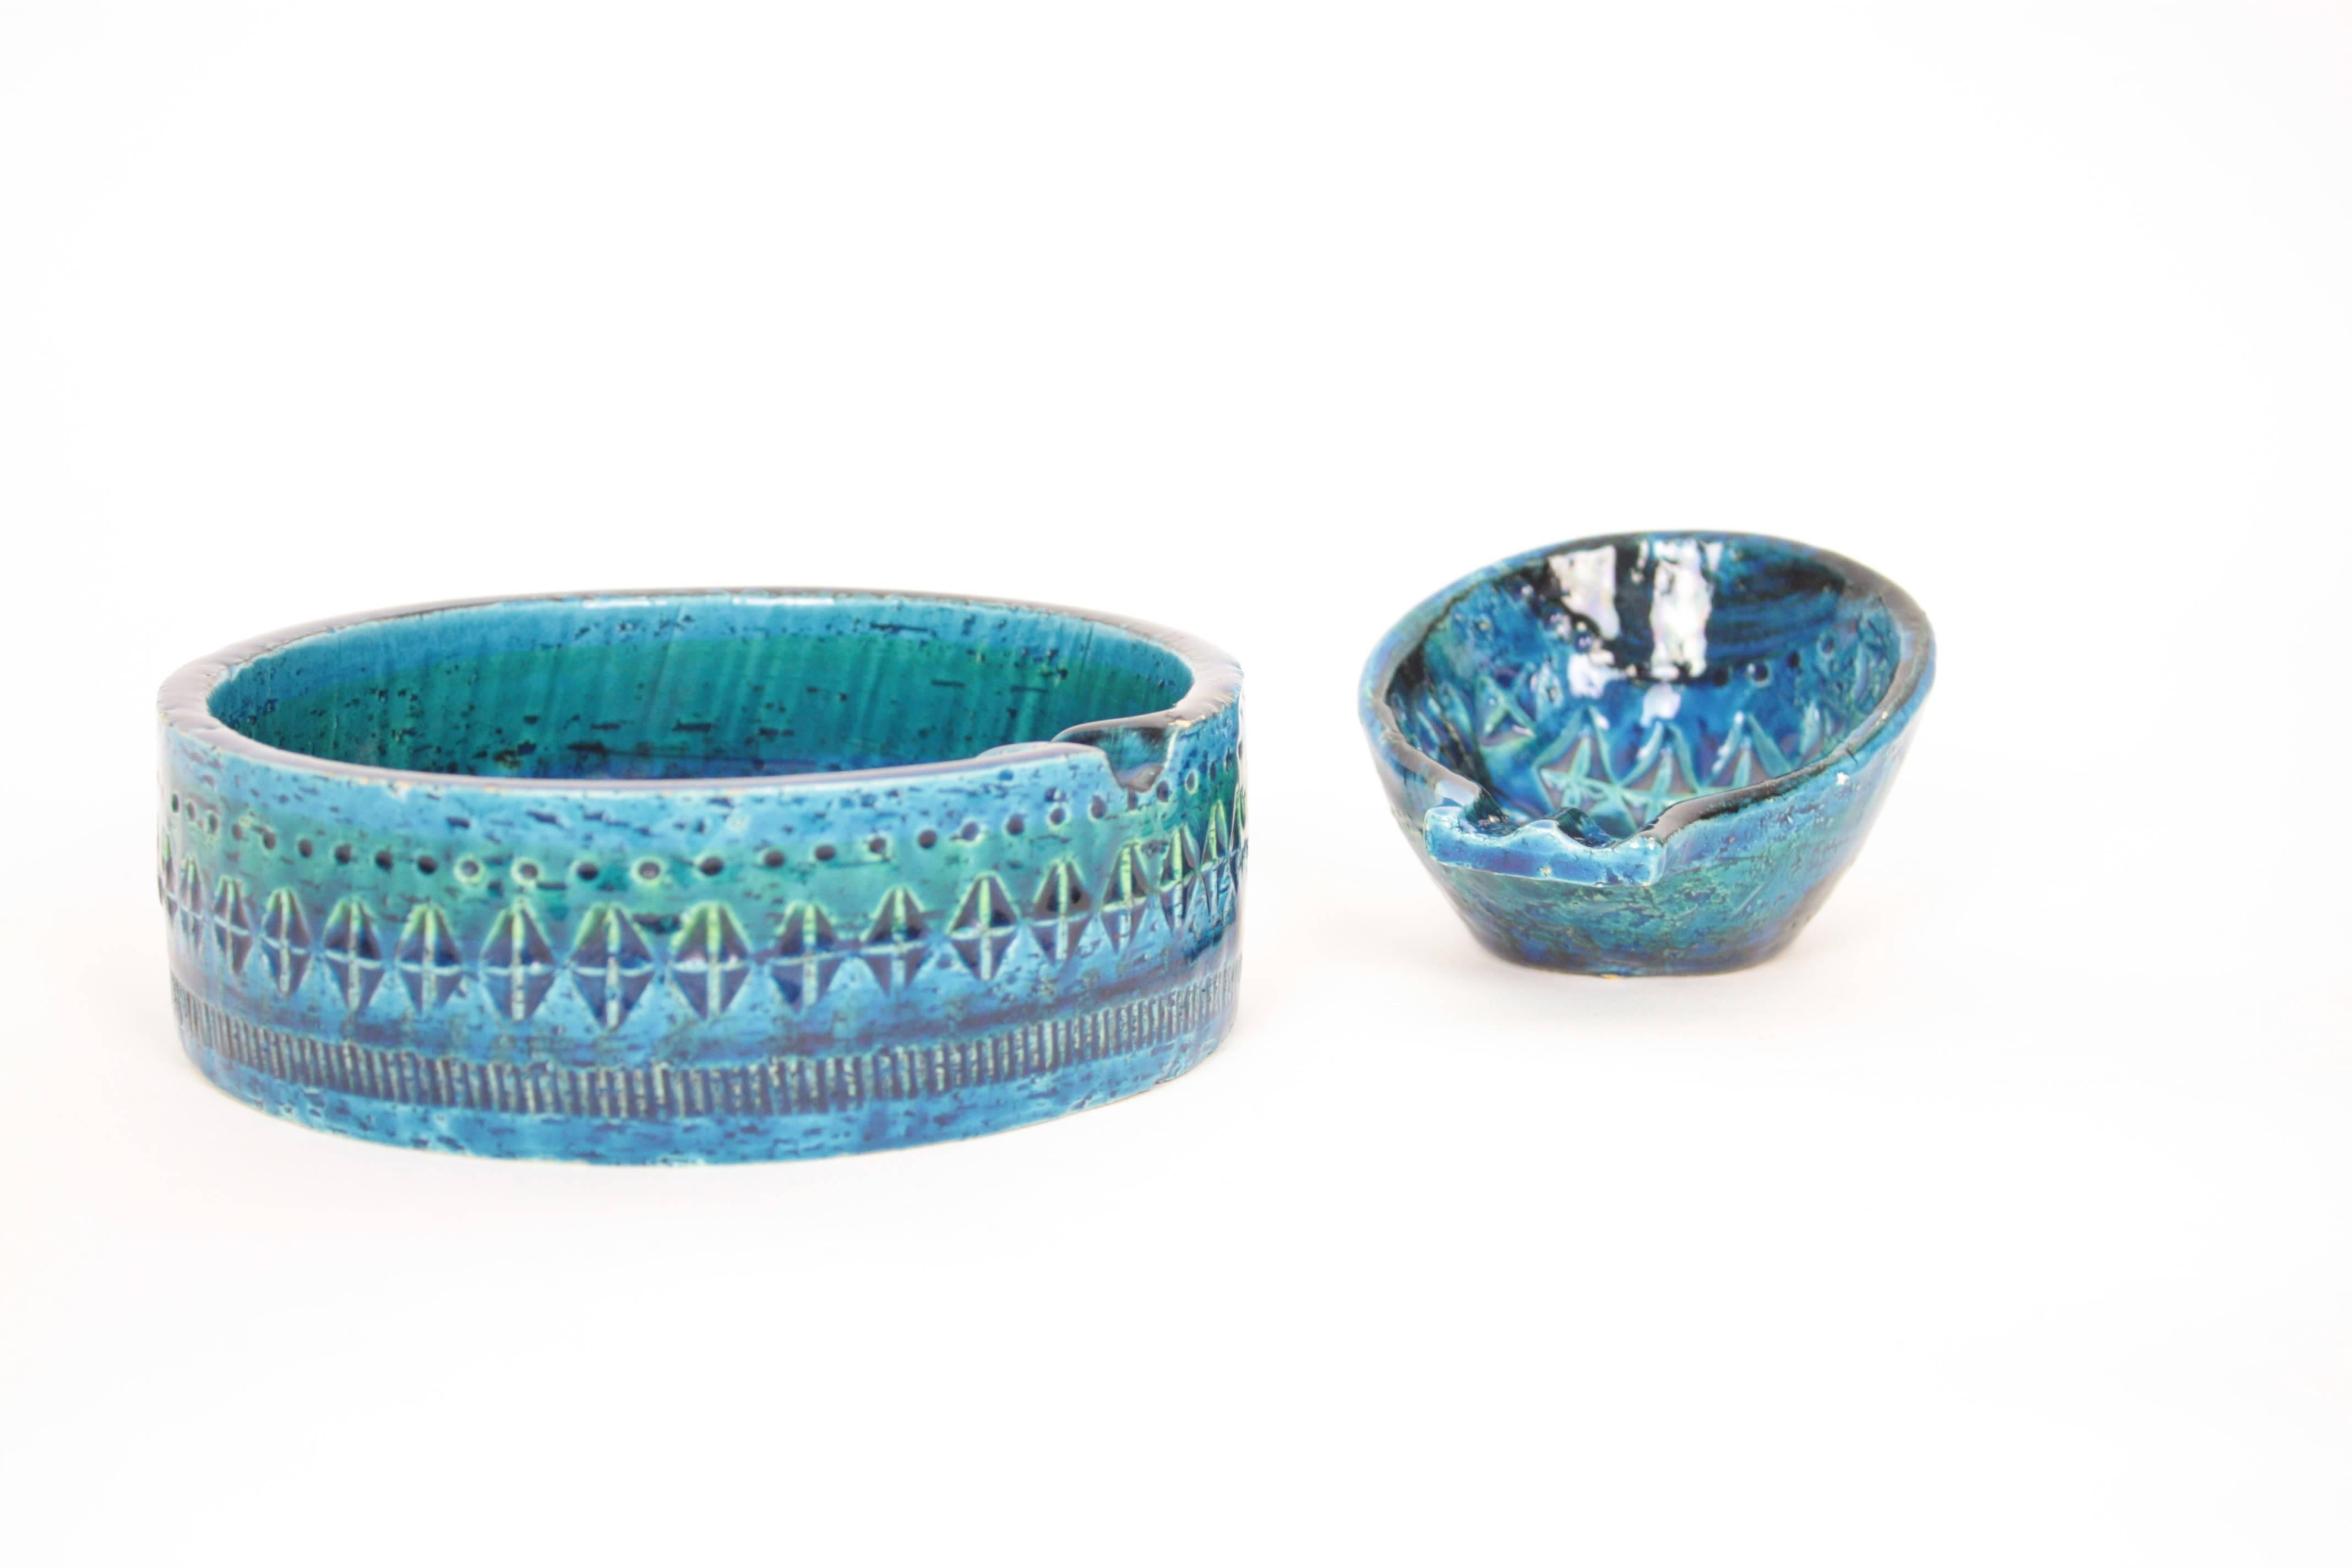 Set of two blue glazed ceramic ashtrays with geometric patterns designed by Aldo Londi and manufactured by Bitossi, Italy, 1950s.
Both of them with the mark 